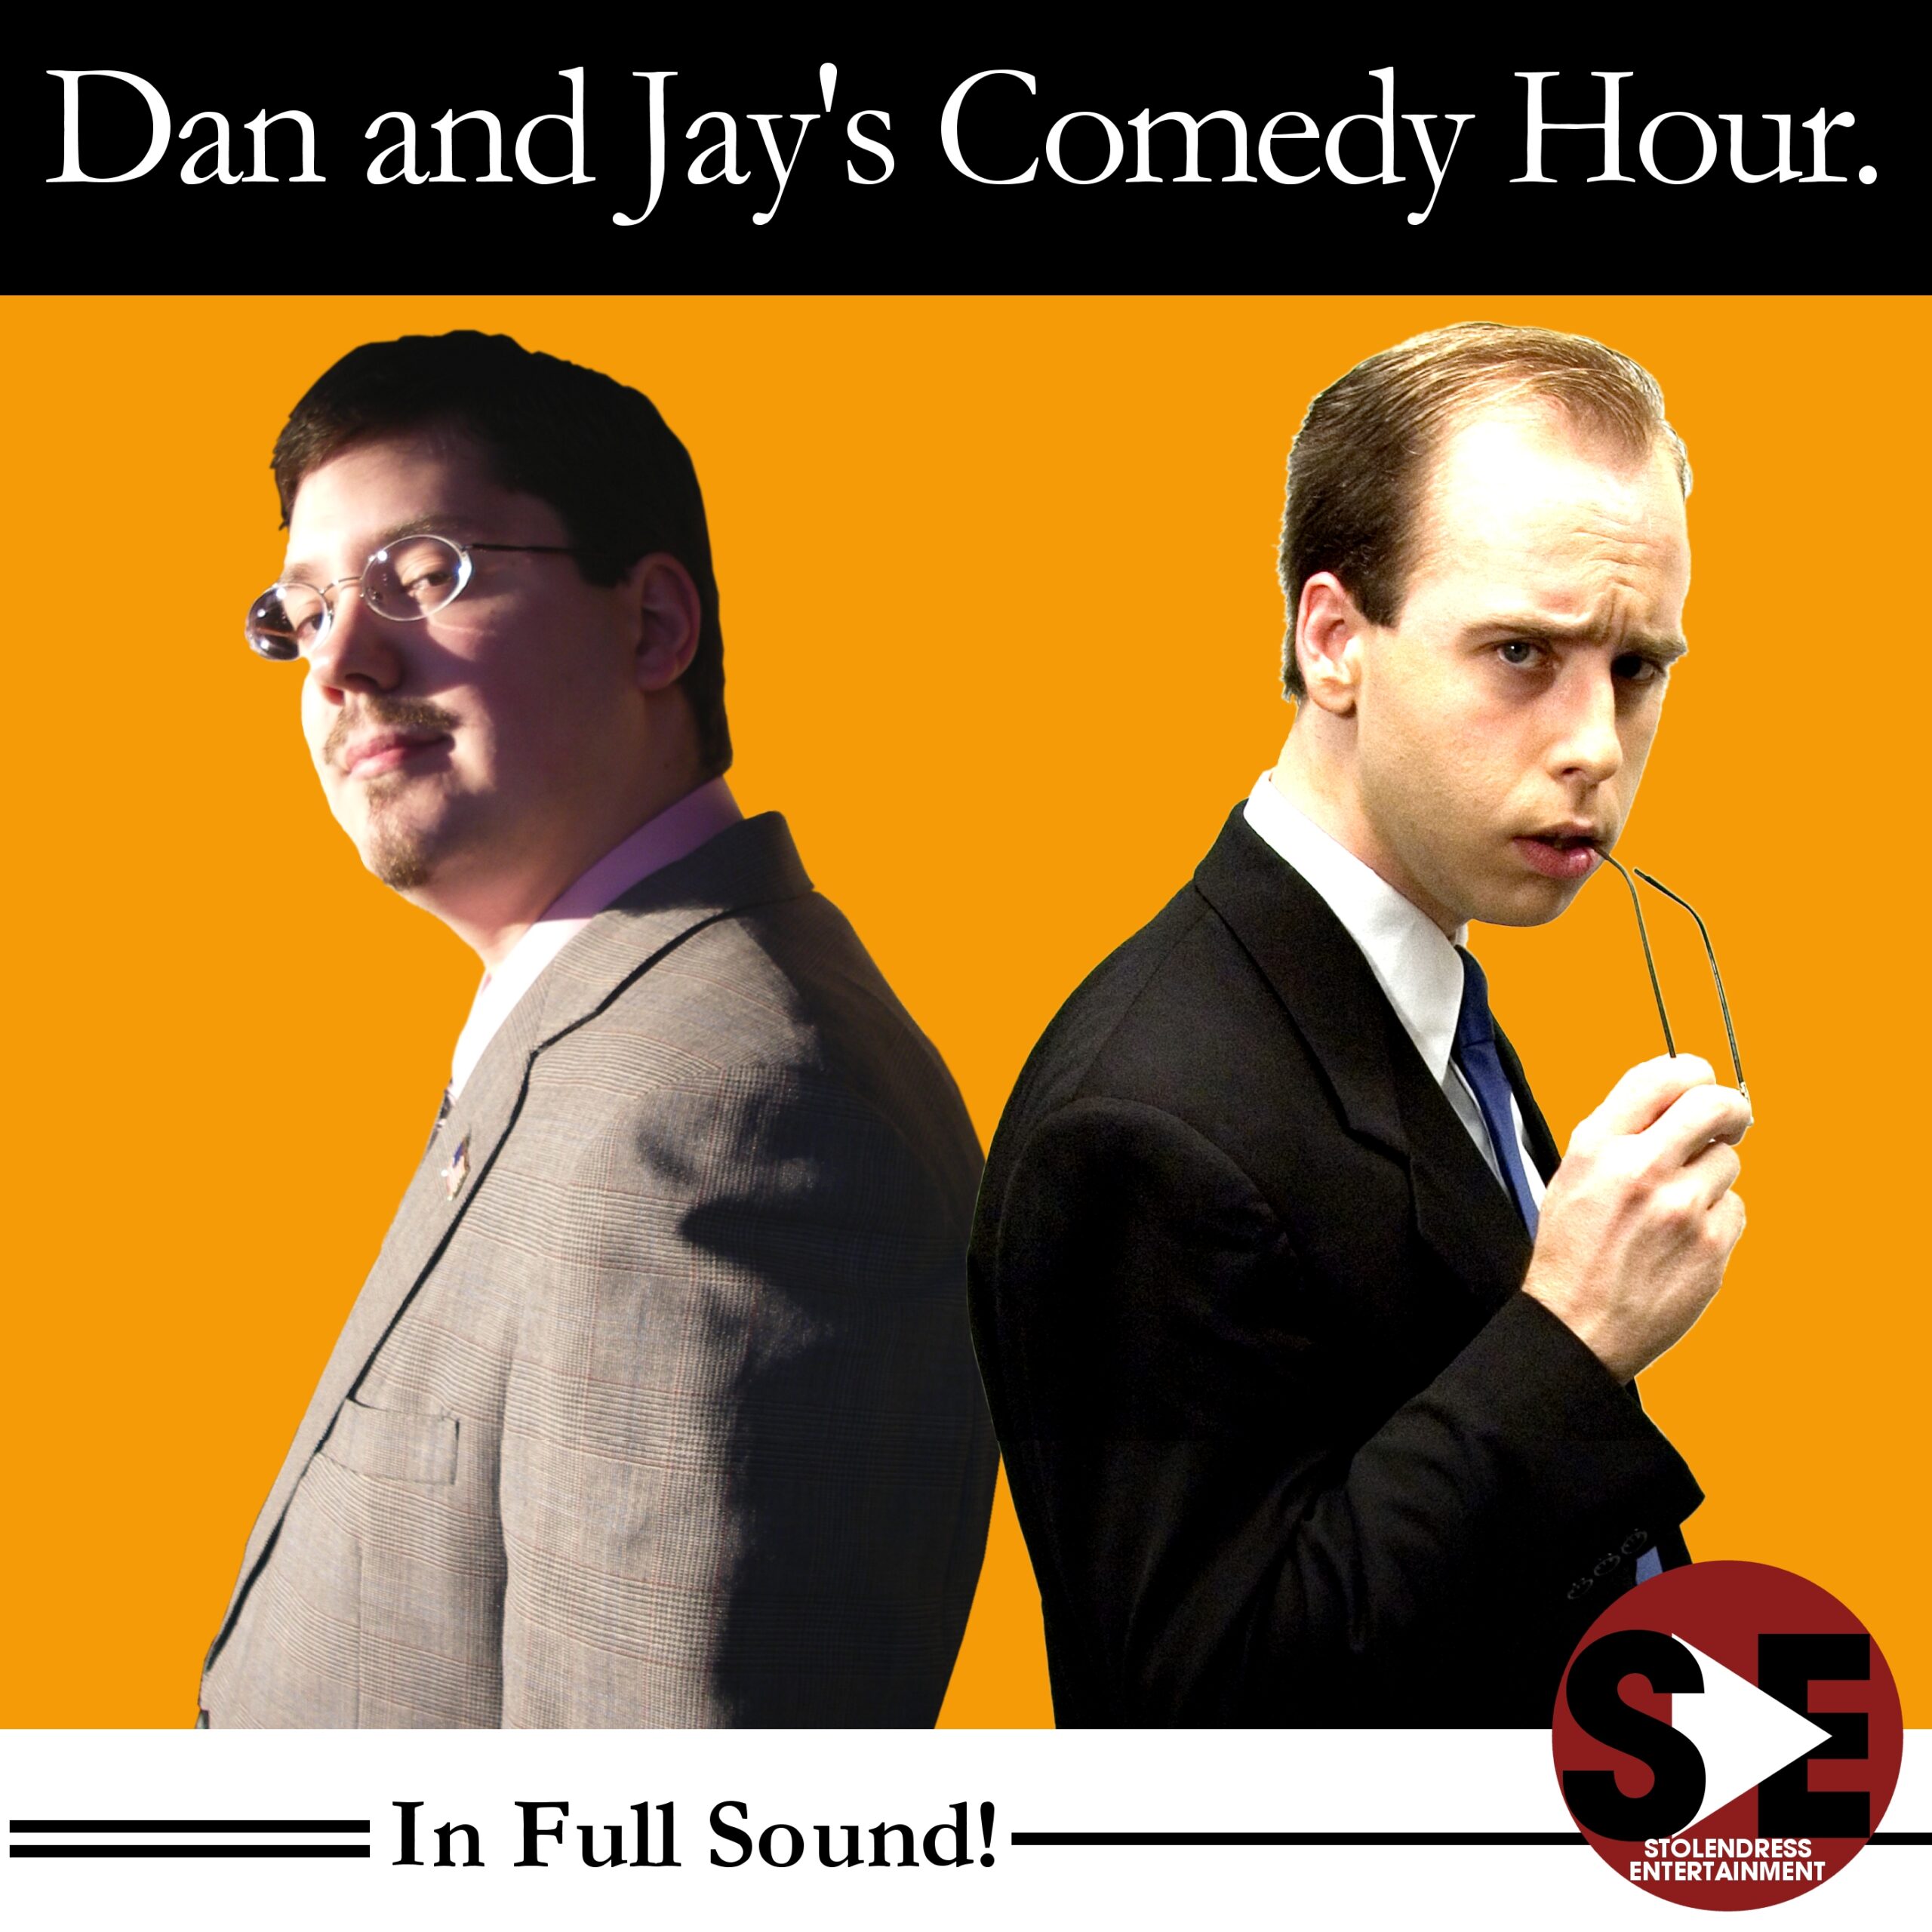 Dan and Jay’s Comedy Hour Podcast Greatest Hits, Volume IV